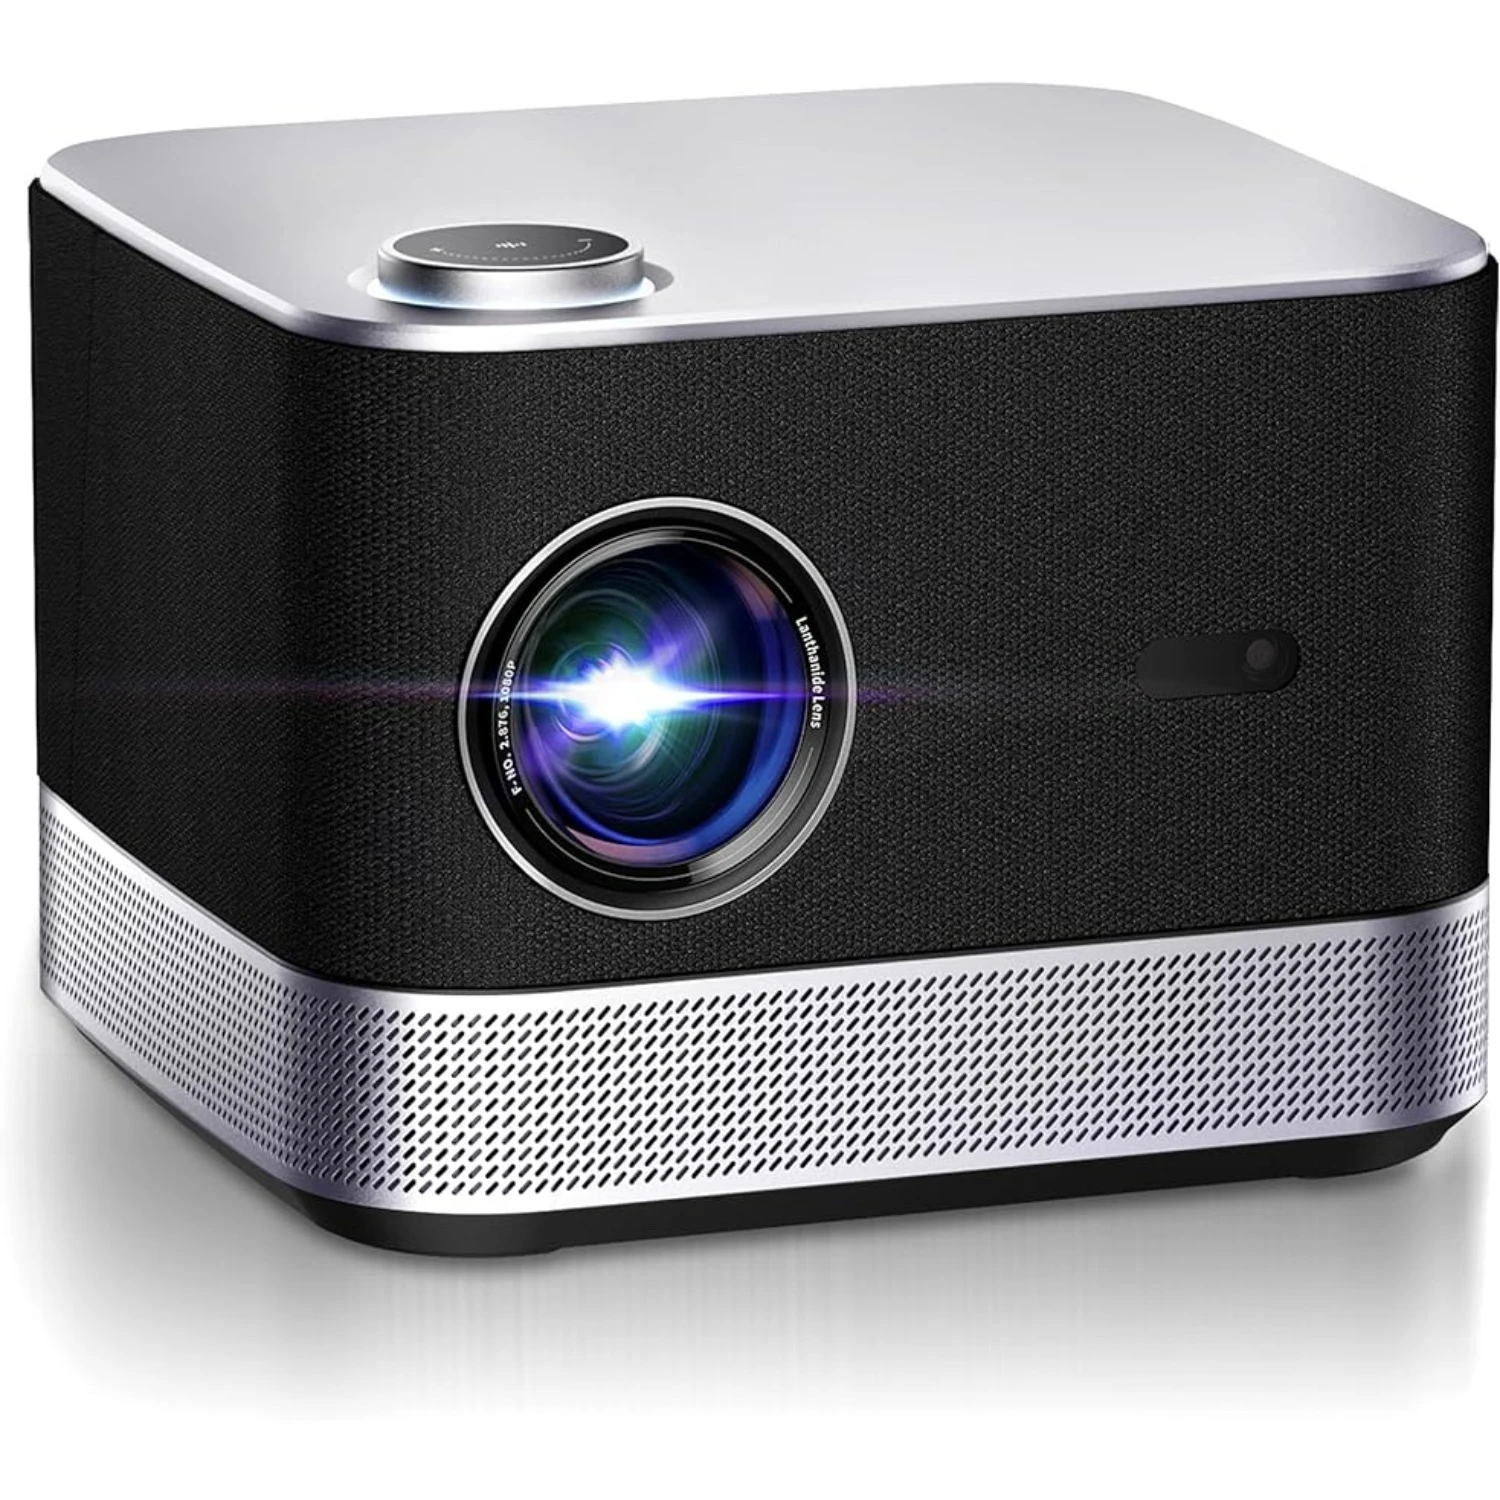 

All-in-One Projector 4K, Smart Projector with WiFi and Bluetooth, 3D Dolby Audio & 36W Speakers, AI Auto Focus & Keystone